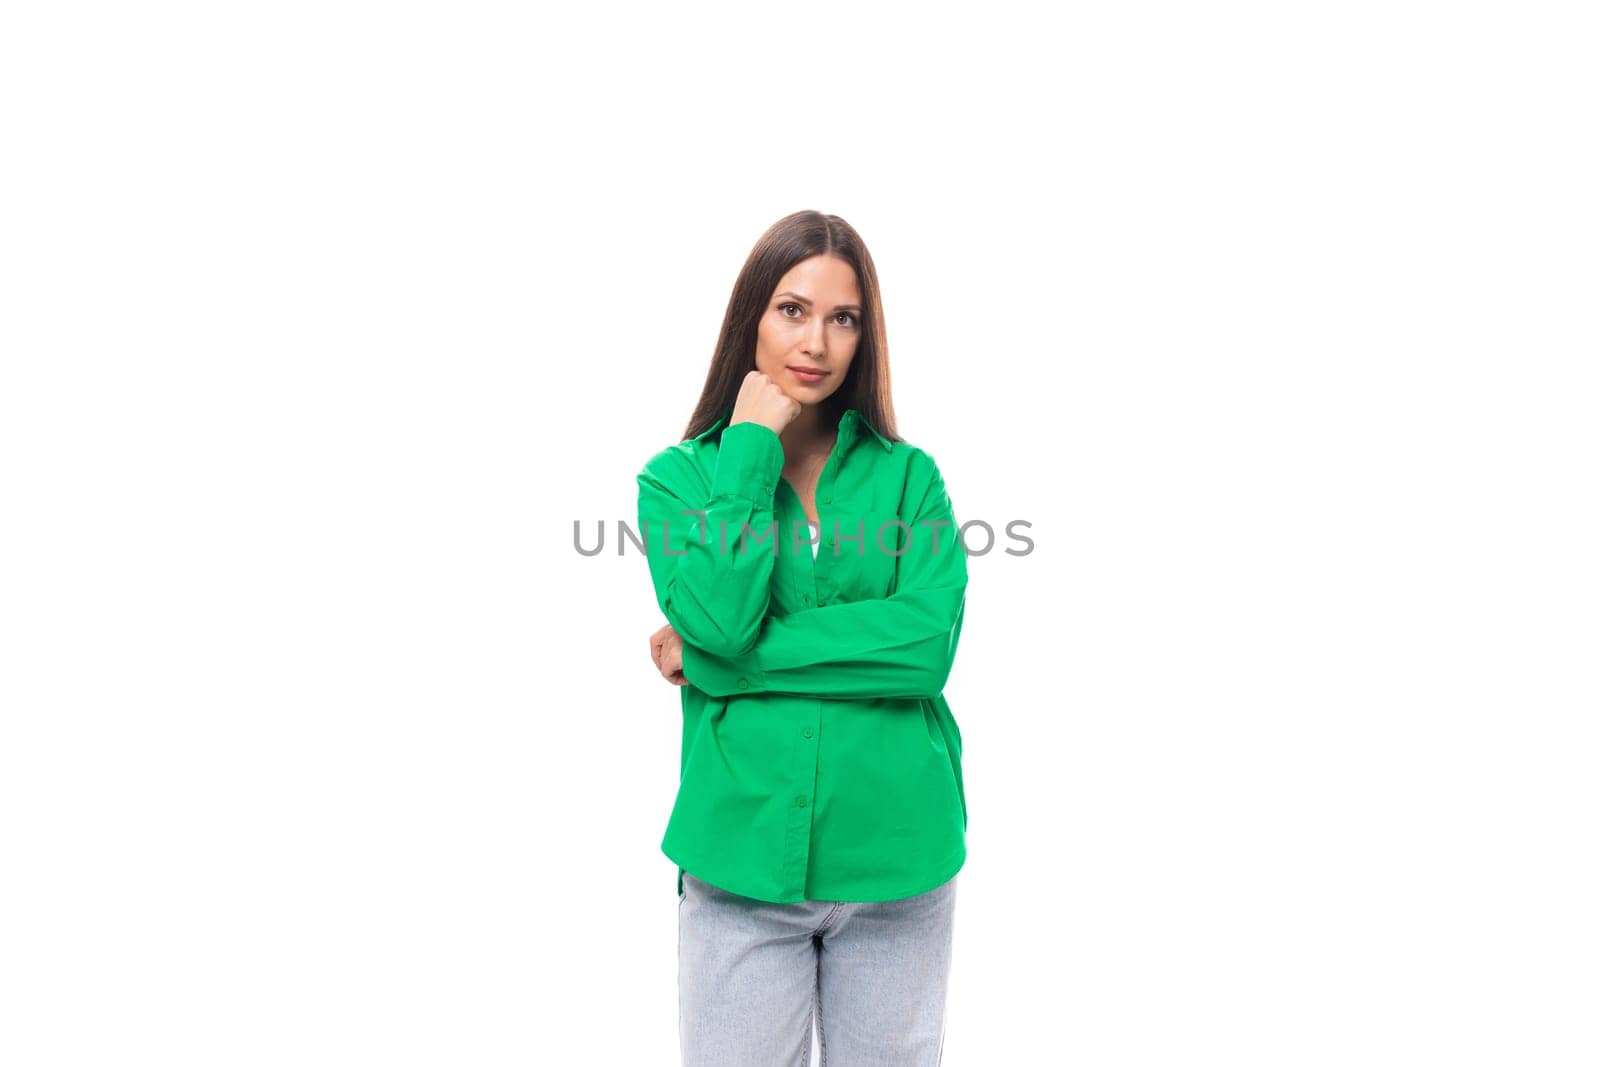 well-groomed bright young brown-haired female model with brown eyes in a green shirt posing on a white background with copy space.